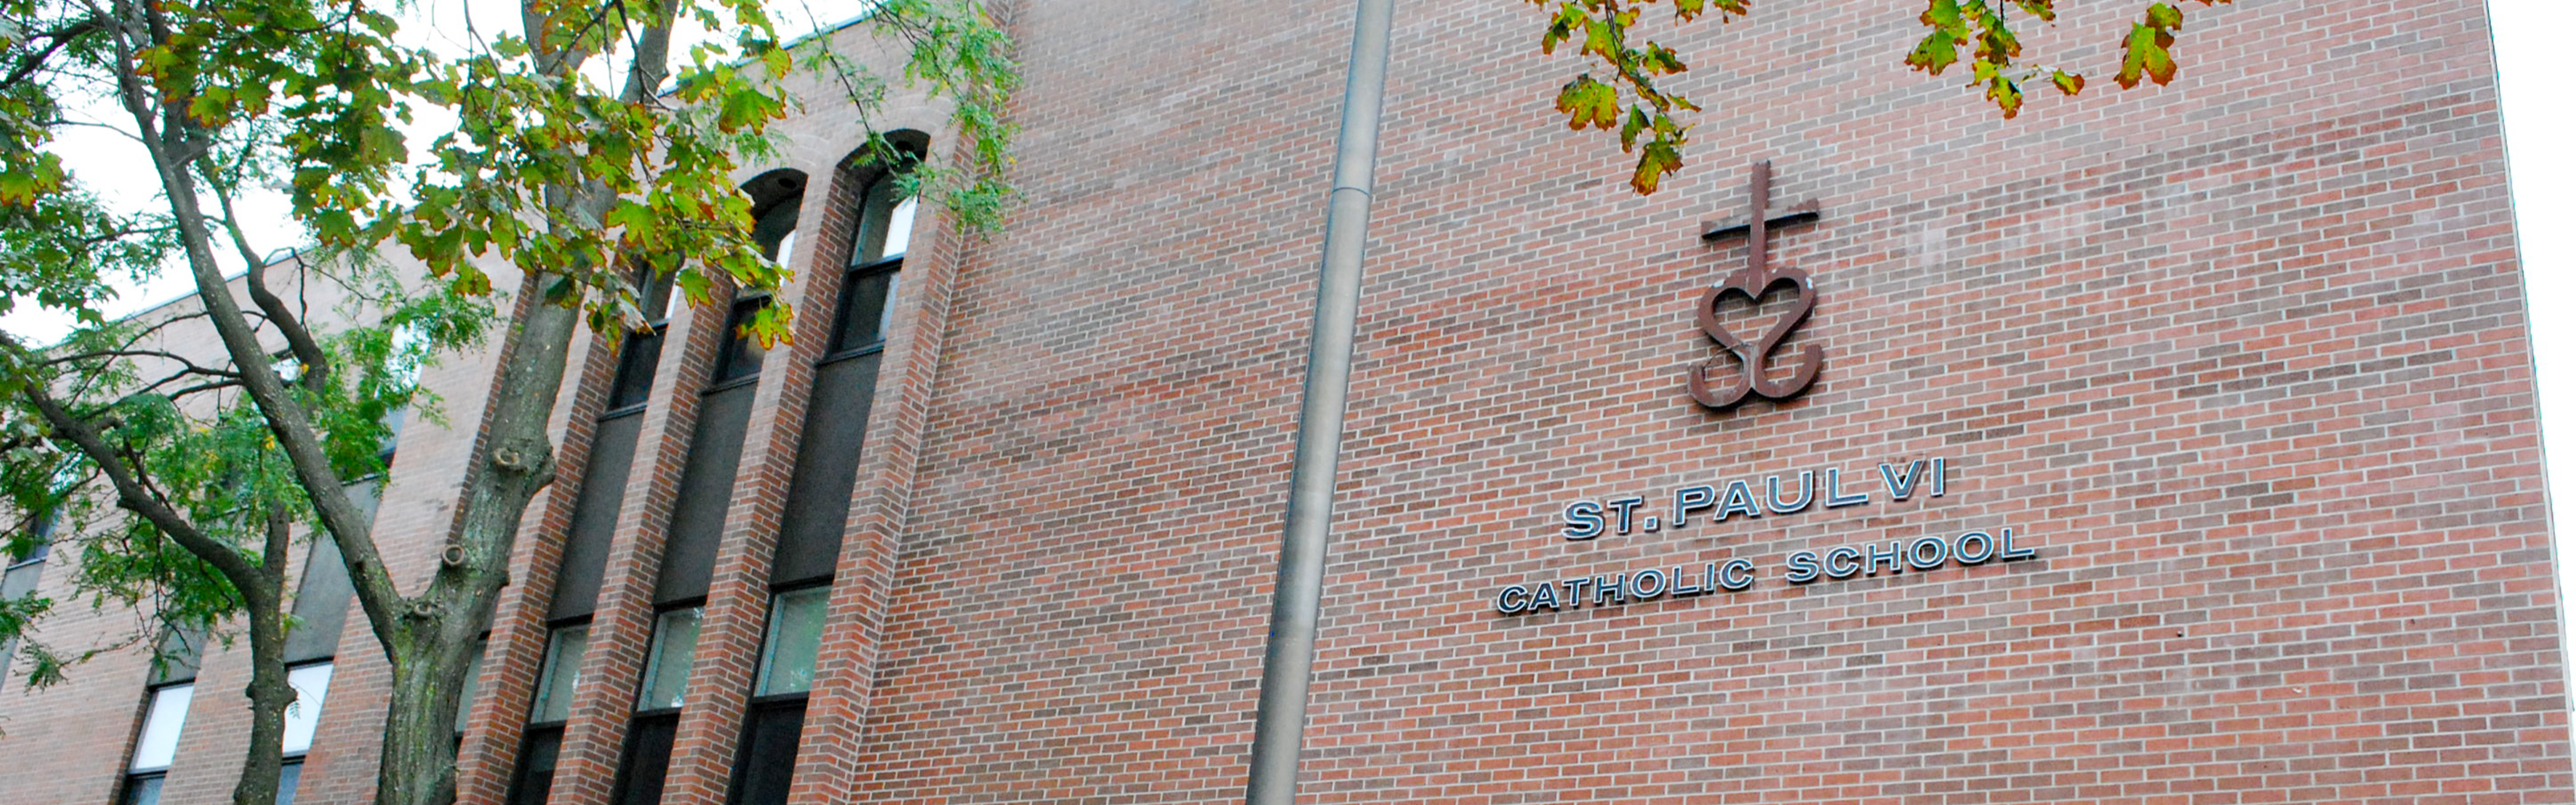 The front of the St. Paul VI Catholic School building.